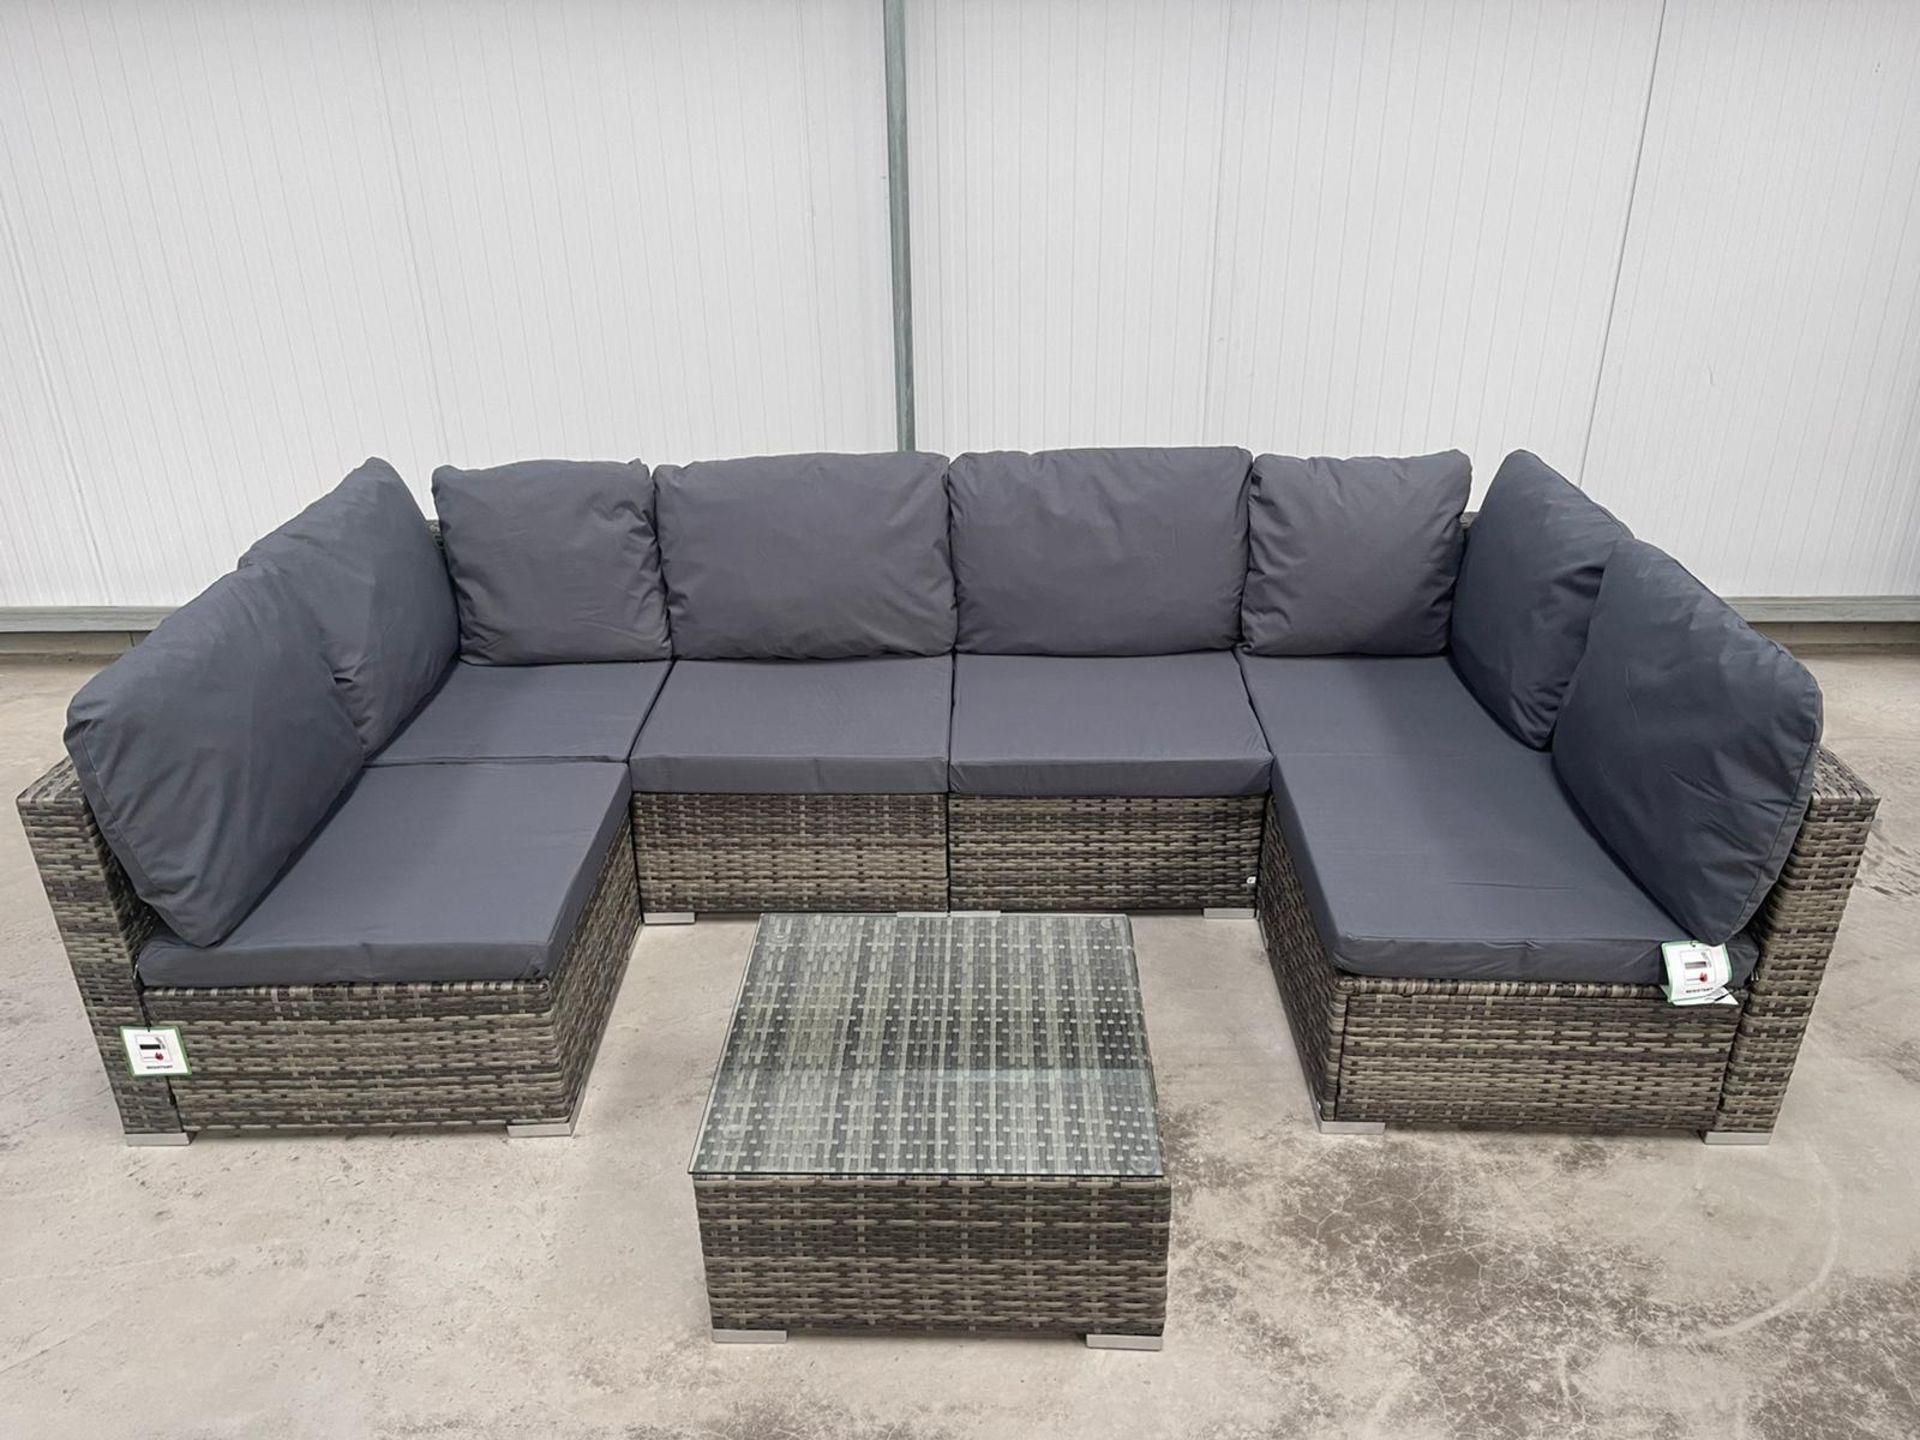 RRP £899 - NEW GREY U-SHAPED MODULAR SOFA WITH GLASS TOPPED COFFEE TABLE. VERY VERSITILE SET THAT